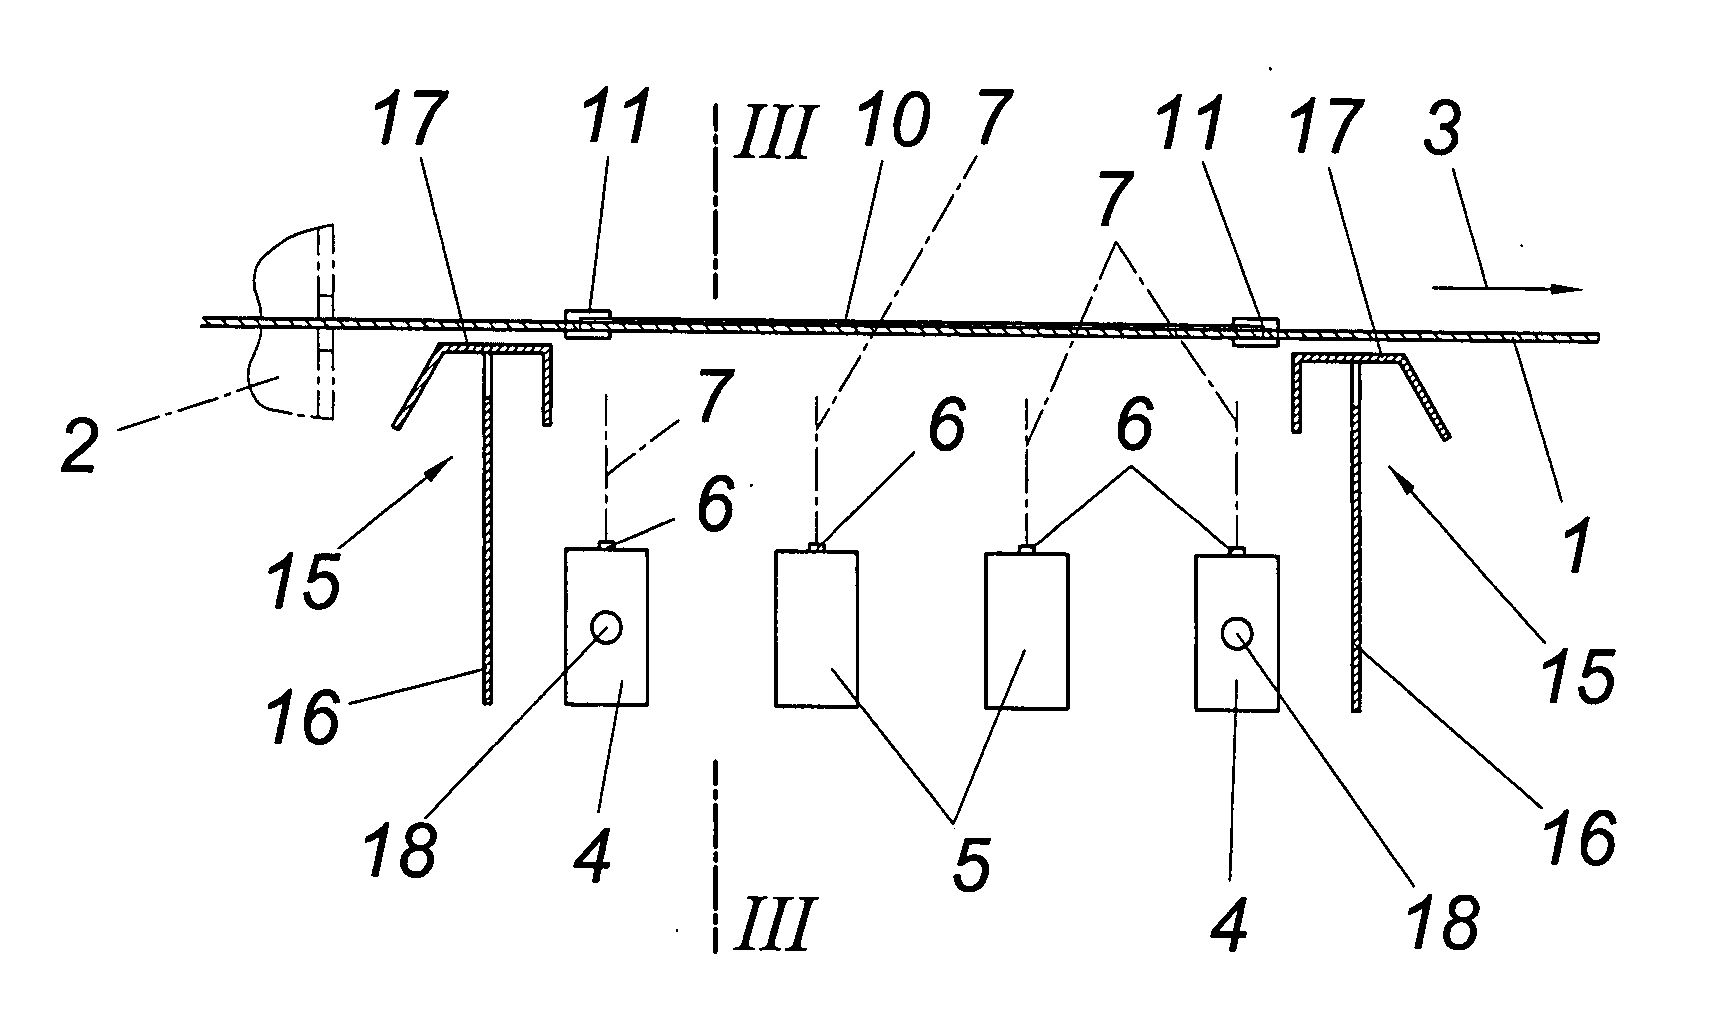 Apparatus for cooling a strip of sheet metal